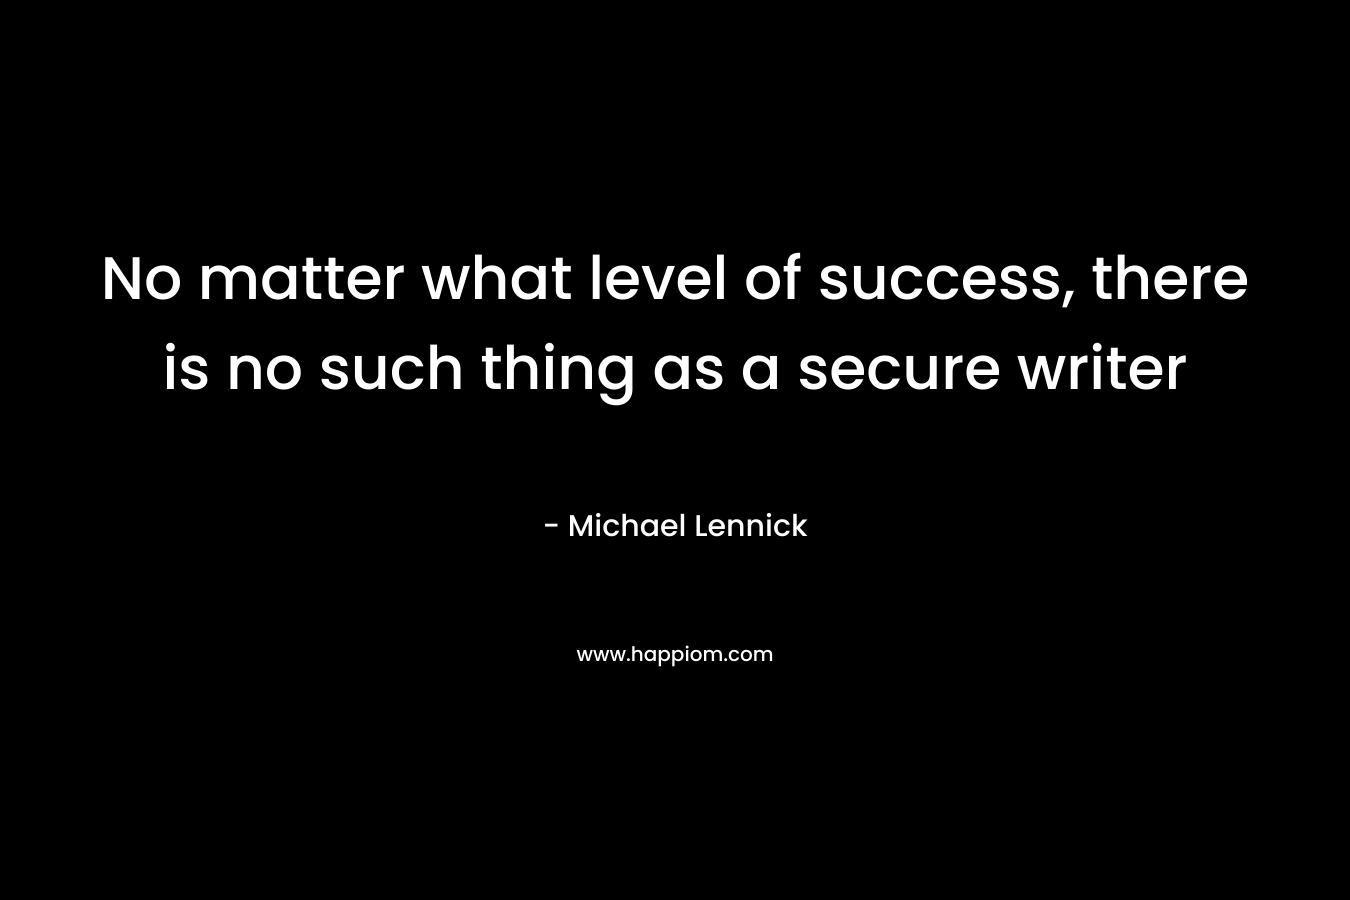 No matter what level of success, there is no such thing as a secure writer – Michael Lennick